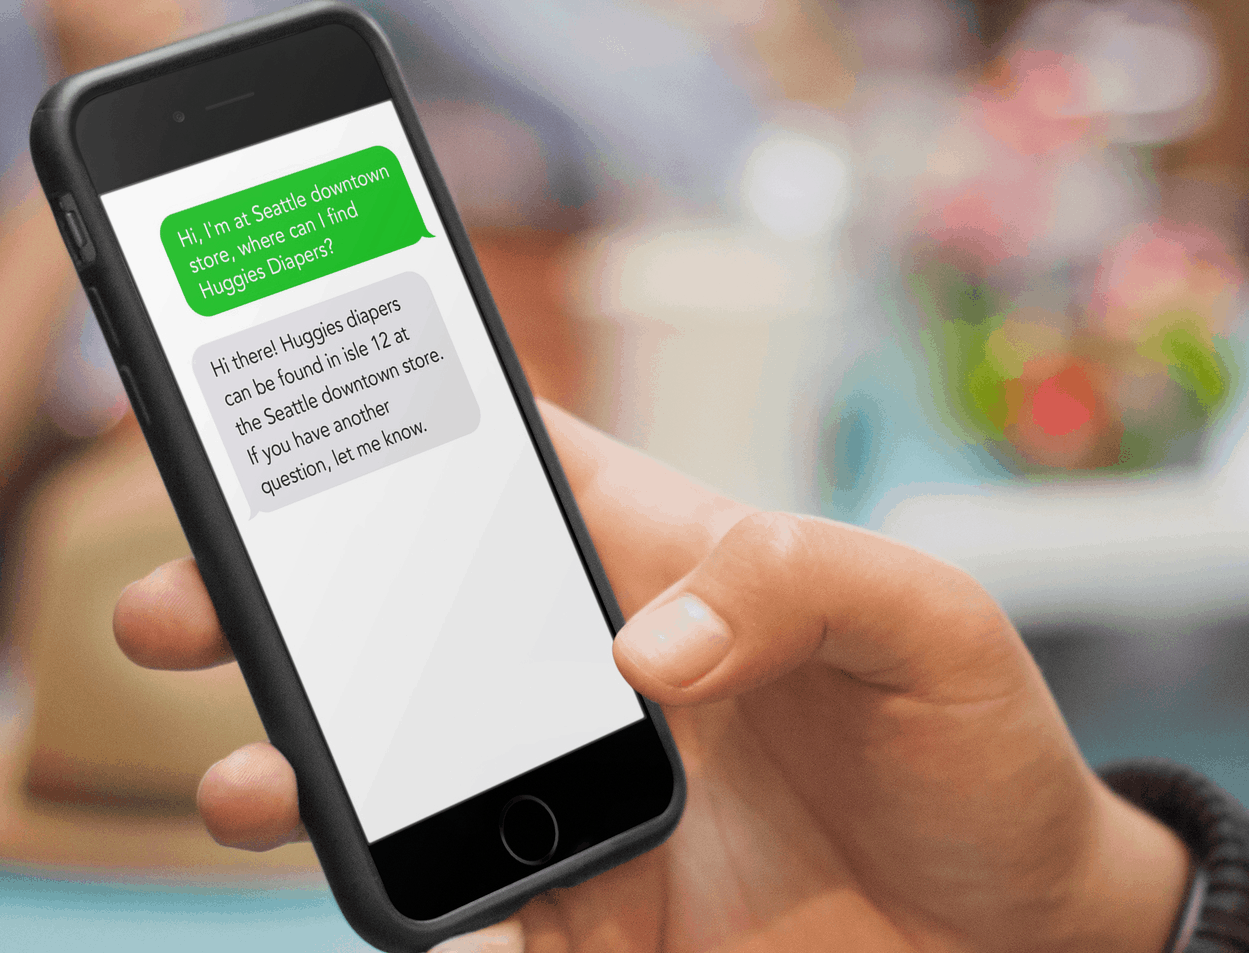 SMS Marketing for Customer Support